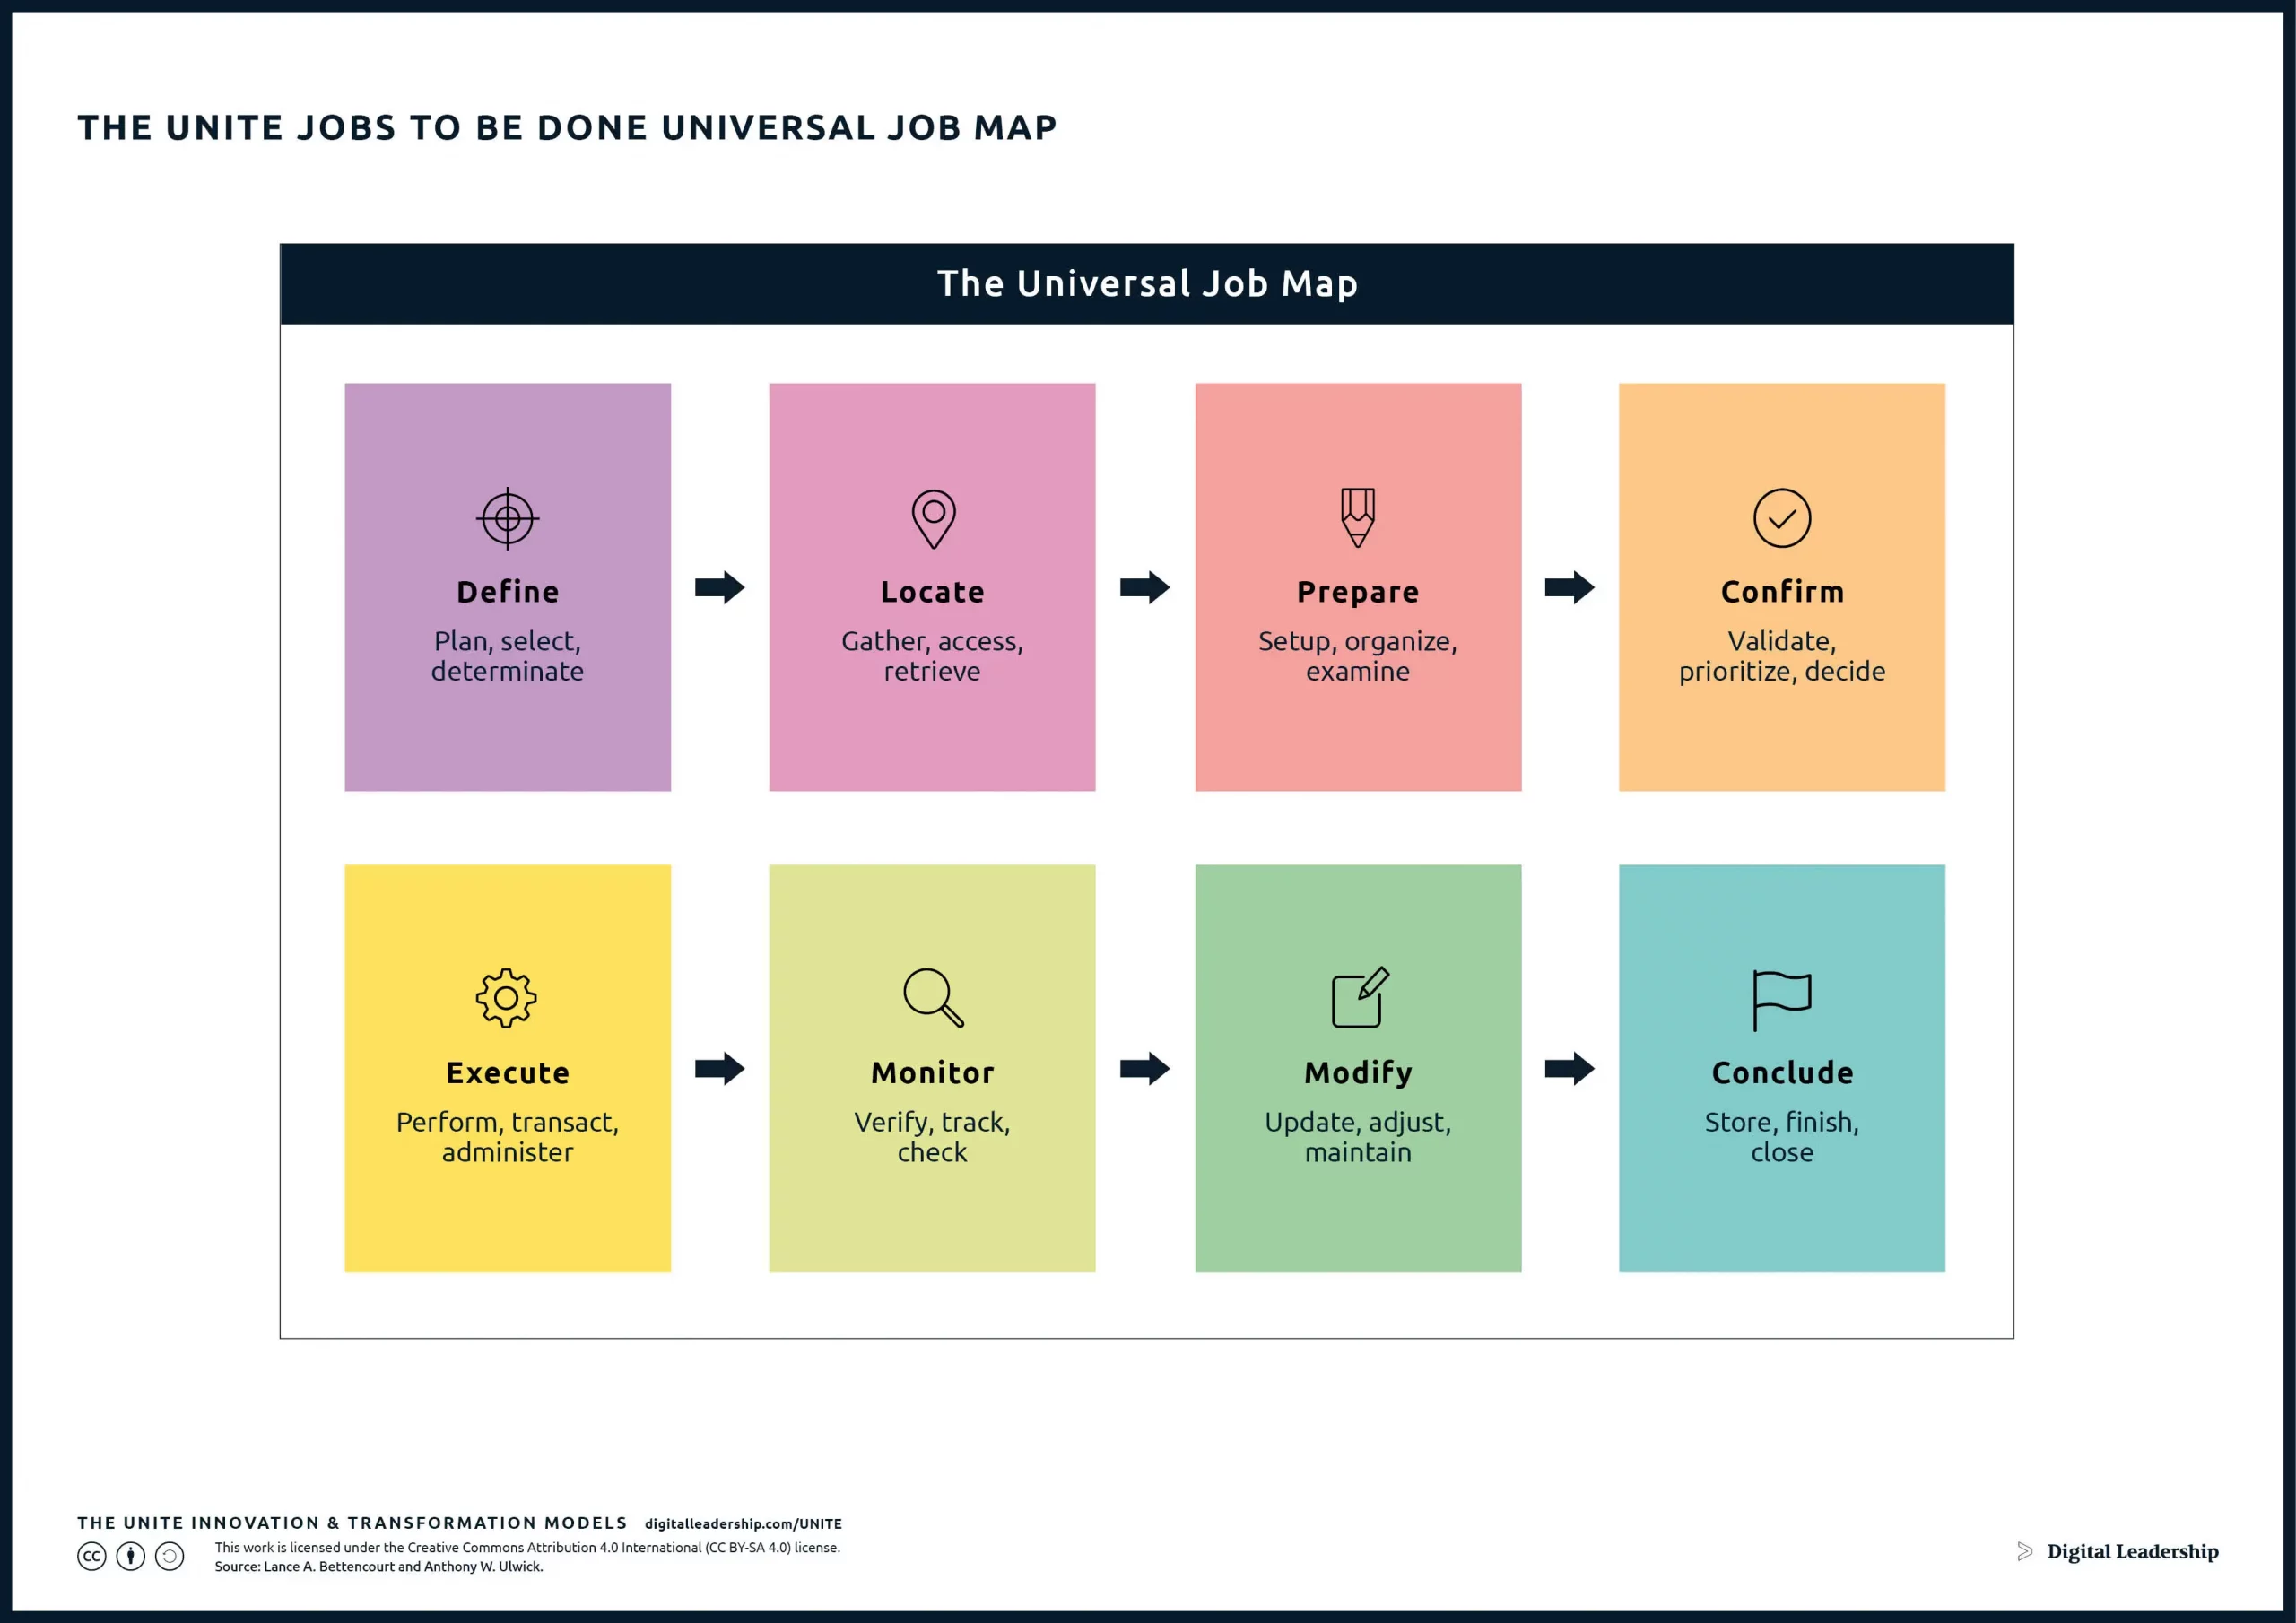 The UNITE Jobs to be Done Universal Map